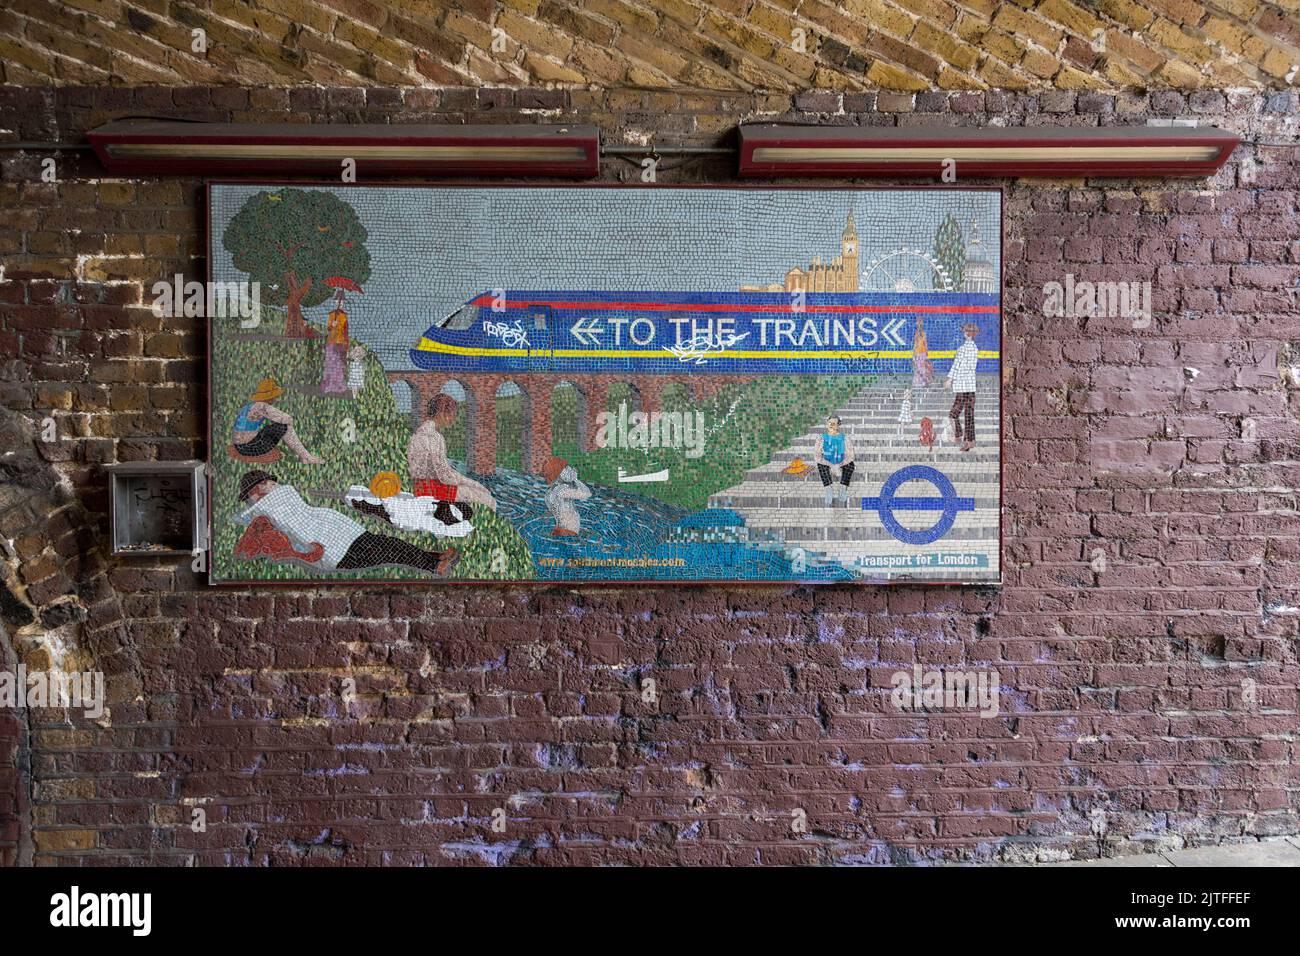 Transport for London mosaic beneath the rail arches at London's Waterloo Station depicting Georges Seurat's famous pointillist Bathers at Asnières Stock Photo